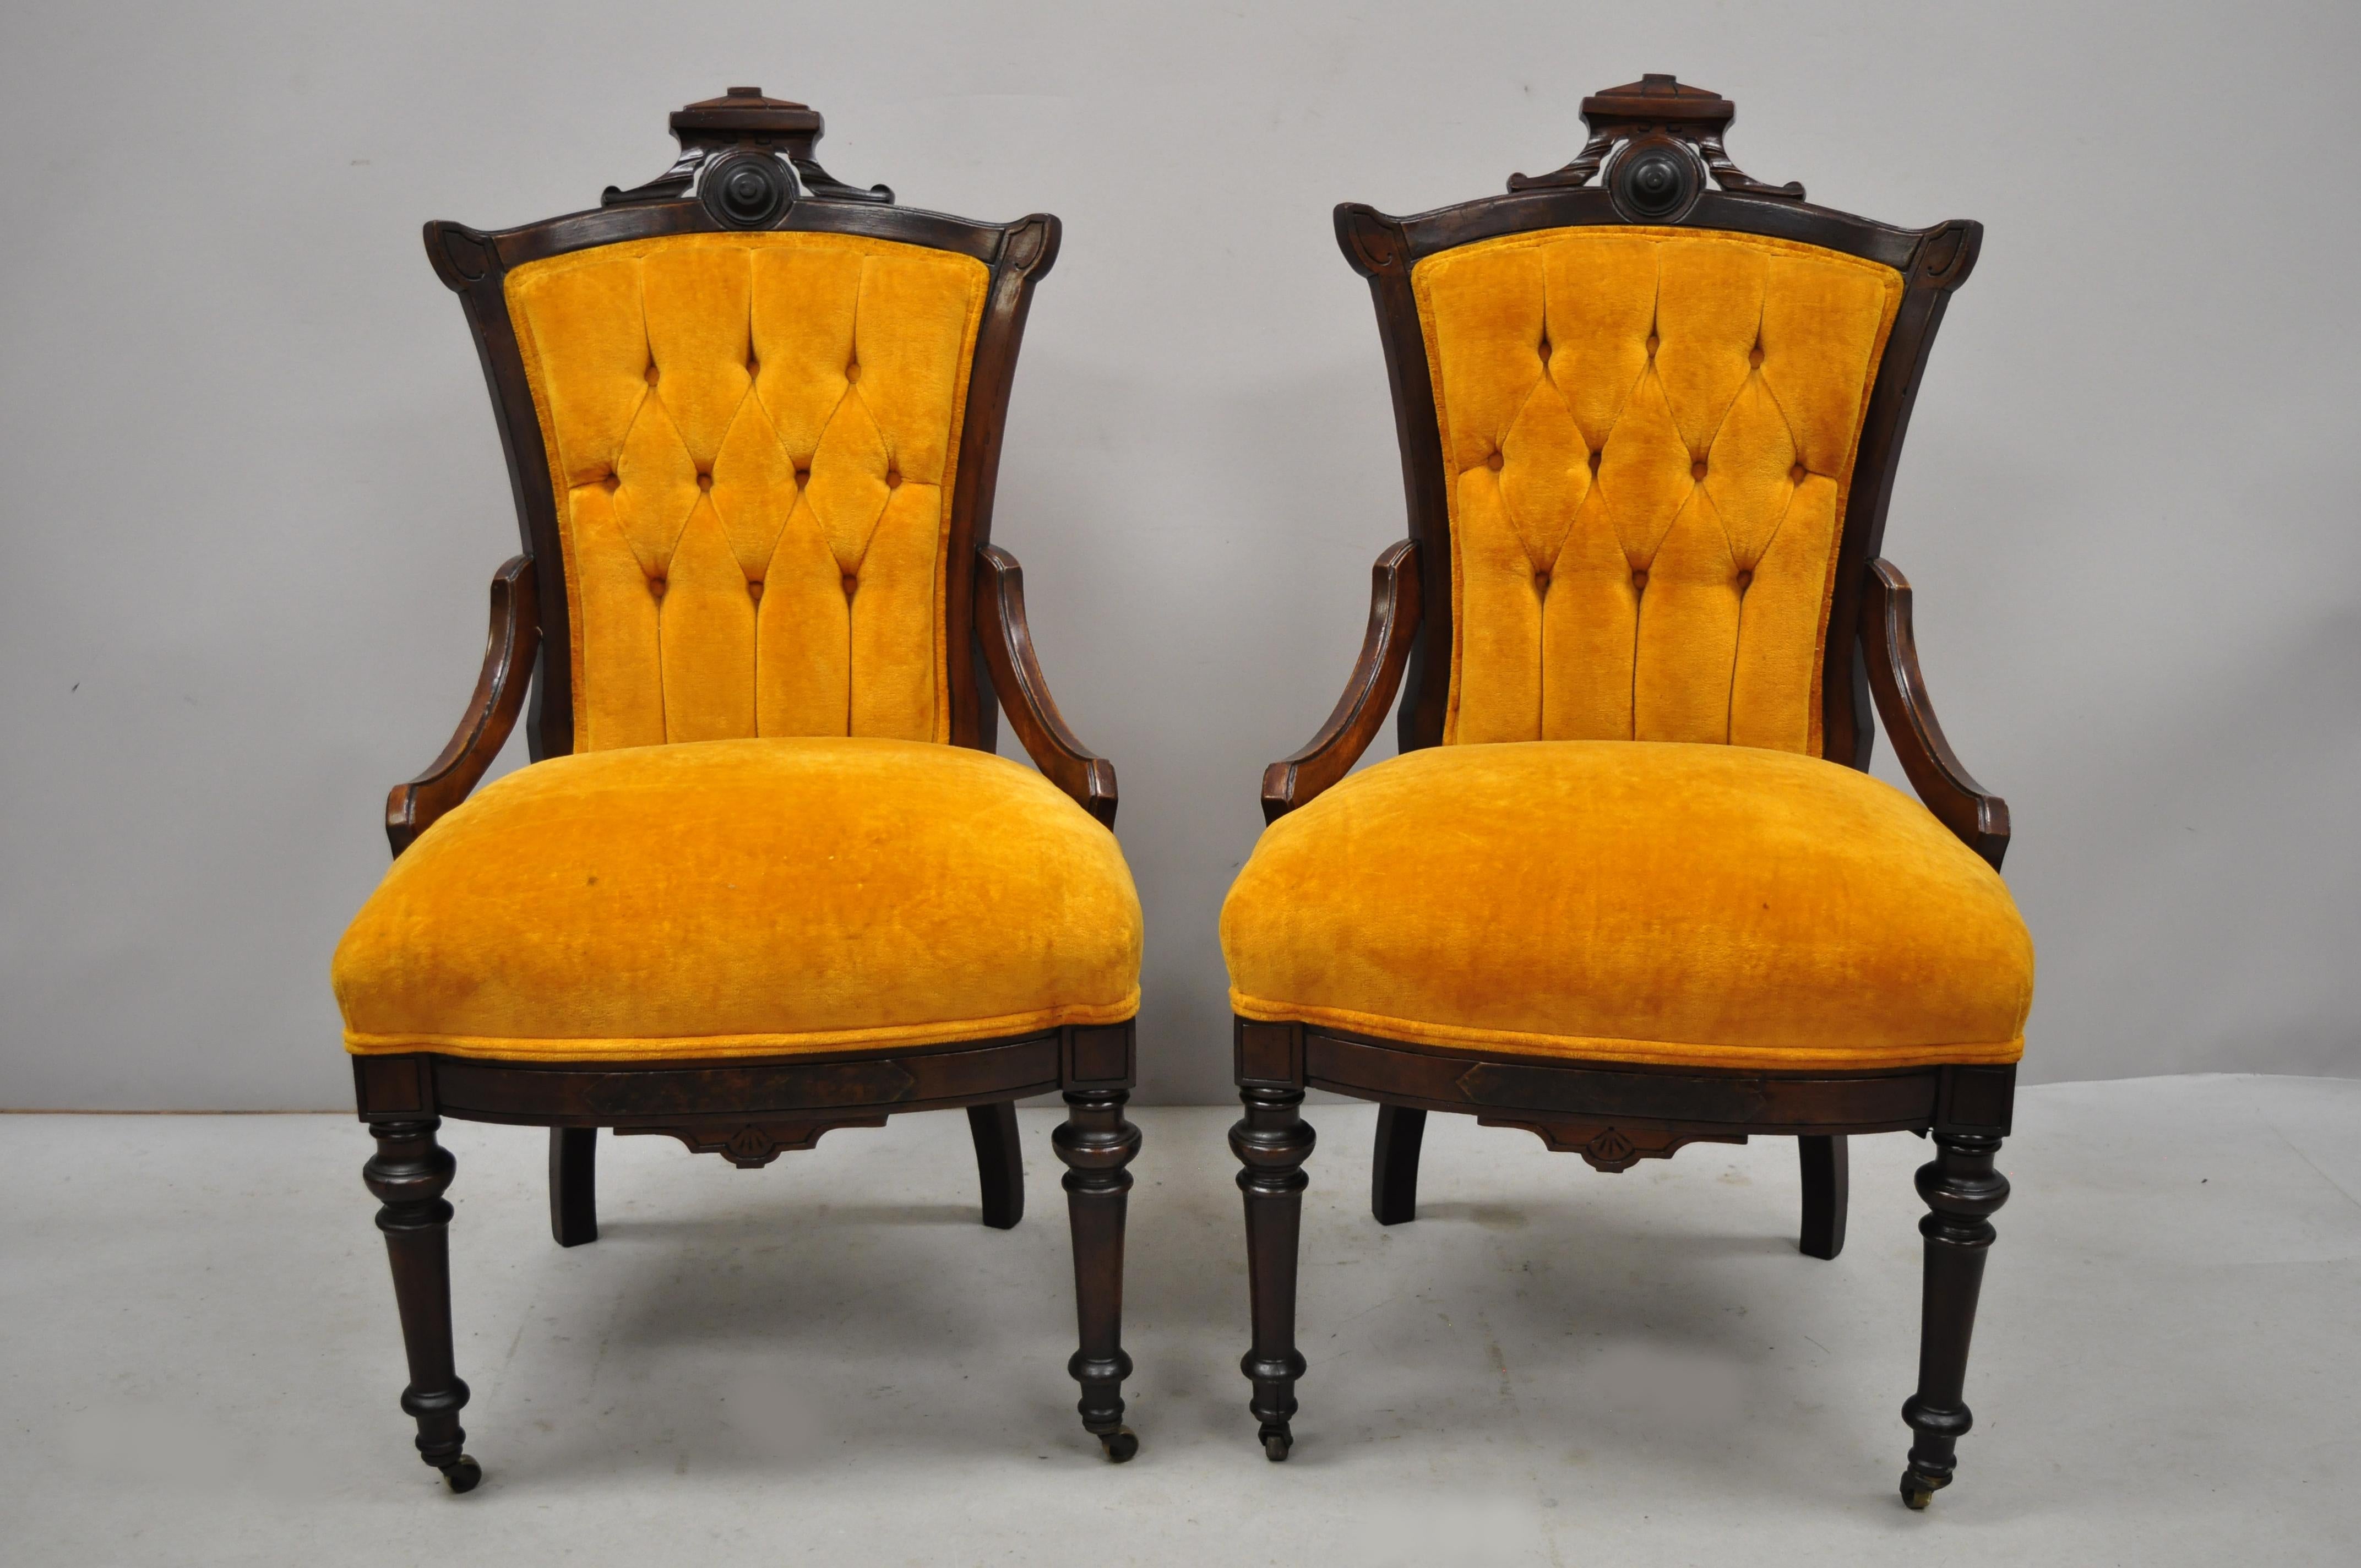 Pair of antique Victorian Eastlake carved walnut orange tufted parlor side chairs. Pair of includes tufted backs, orange upholstery, rolling casters, solid wood frame, beautiful wood grain, nicely carved details, very nice antique item, circa 19th